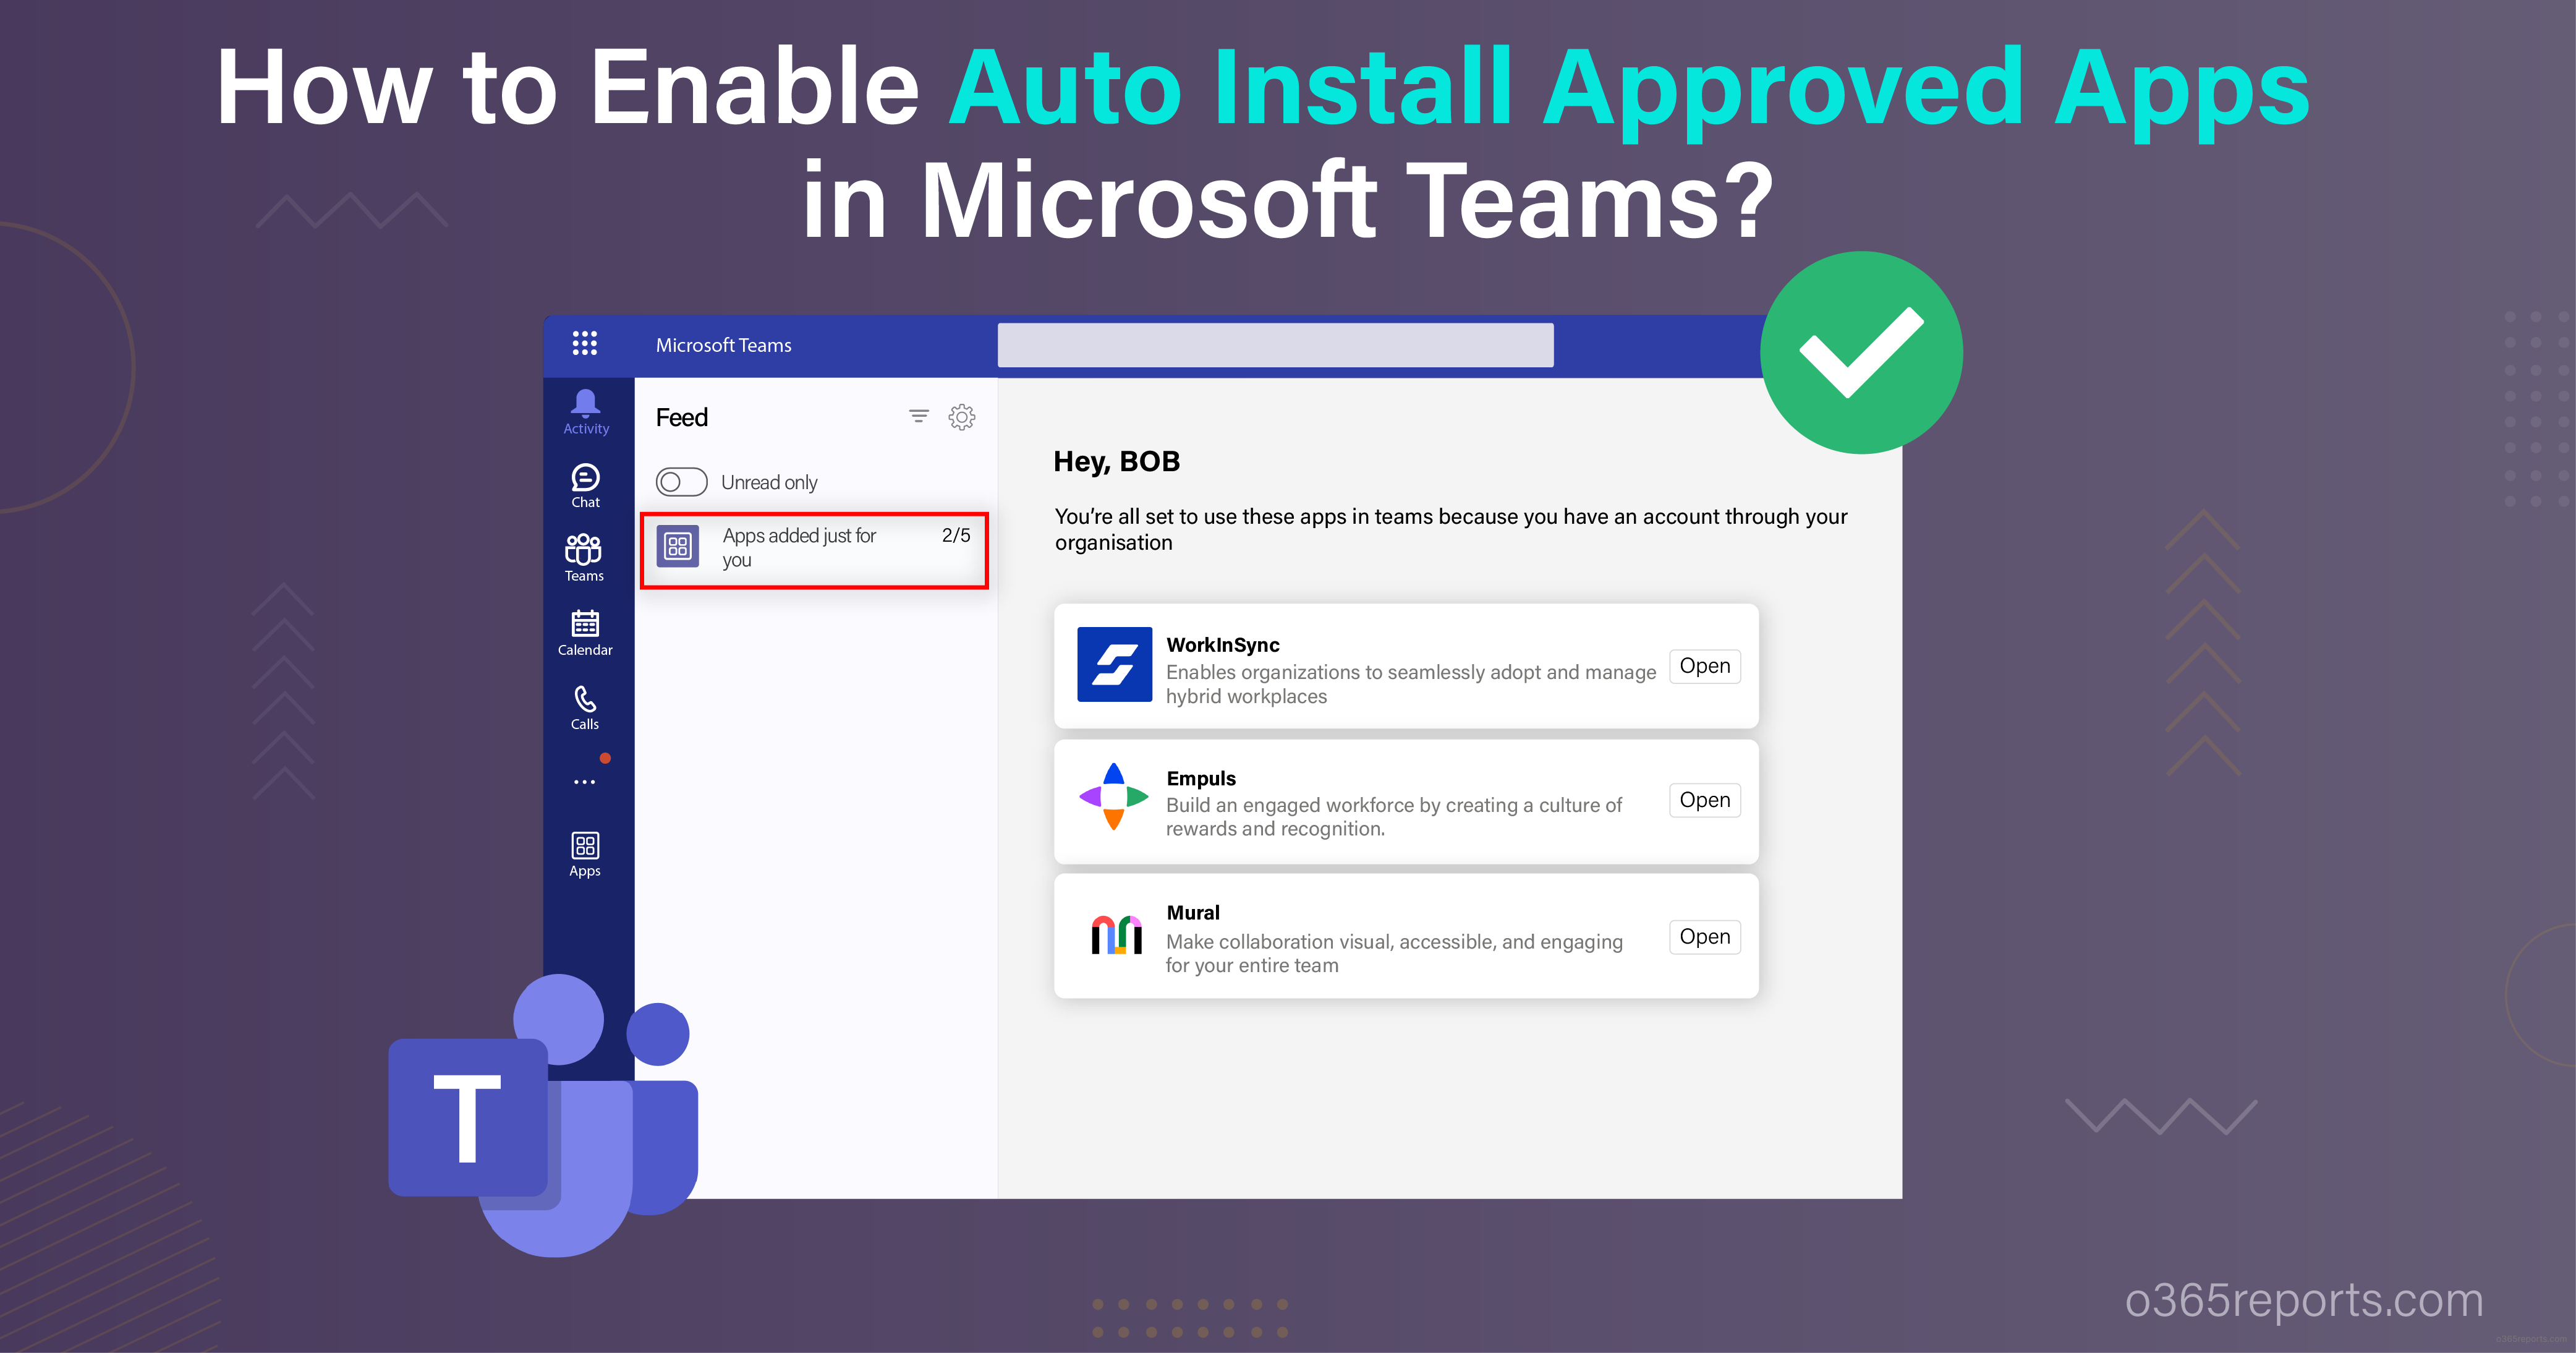 How to Enable Auto Install Approved Apps in Microsoft Teams